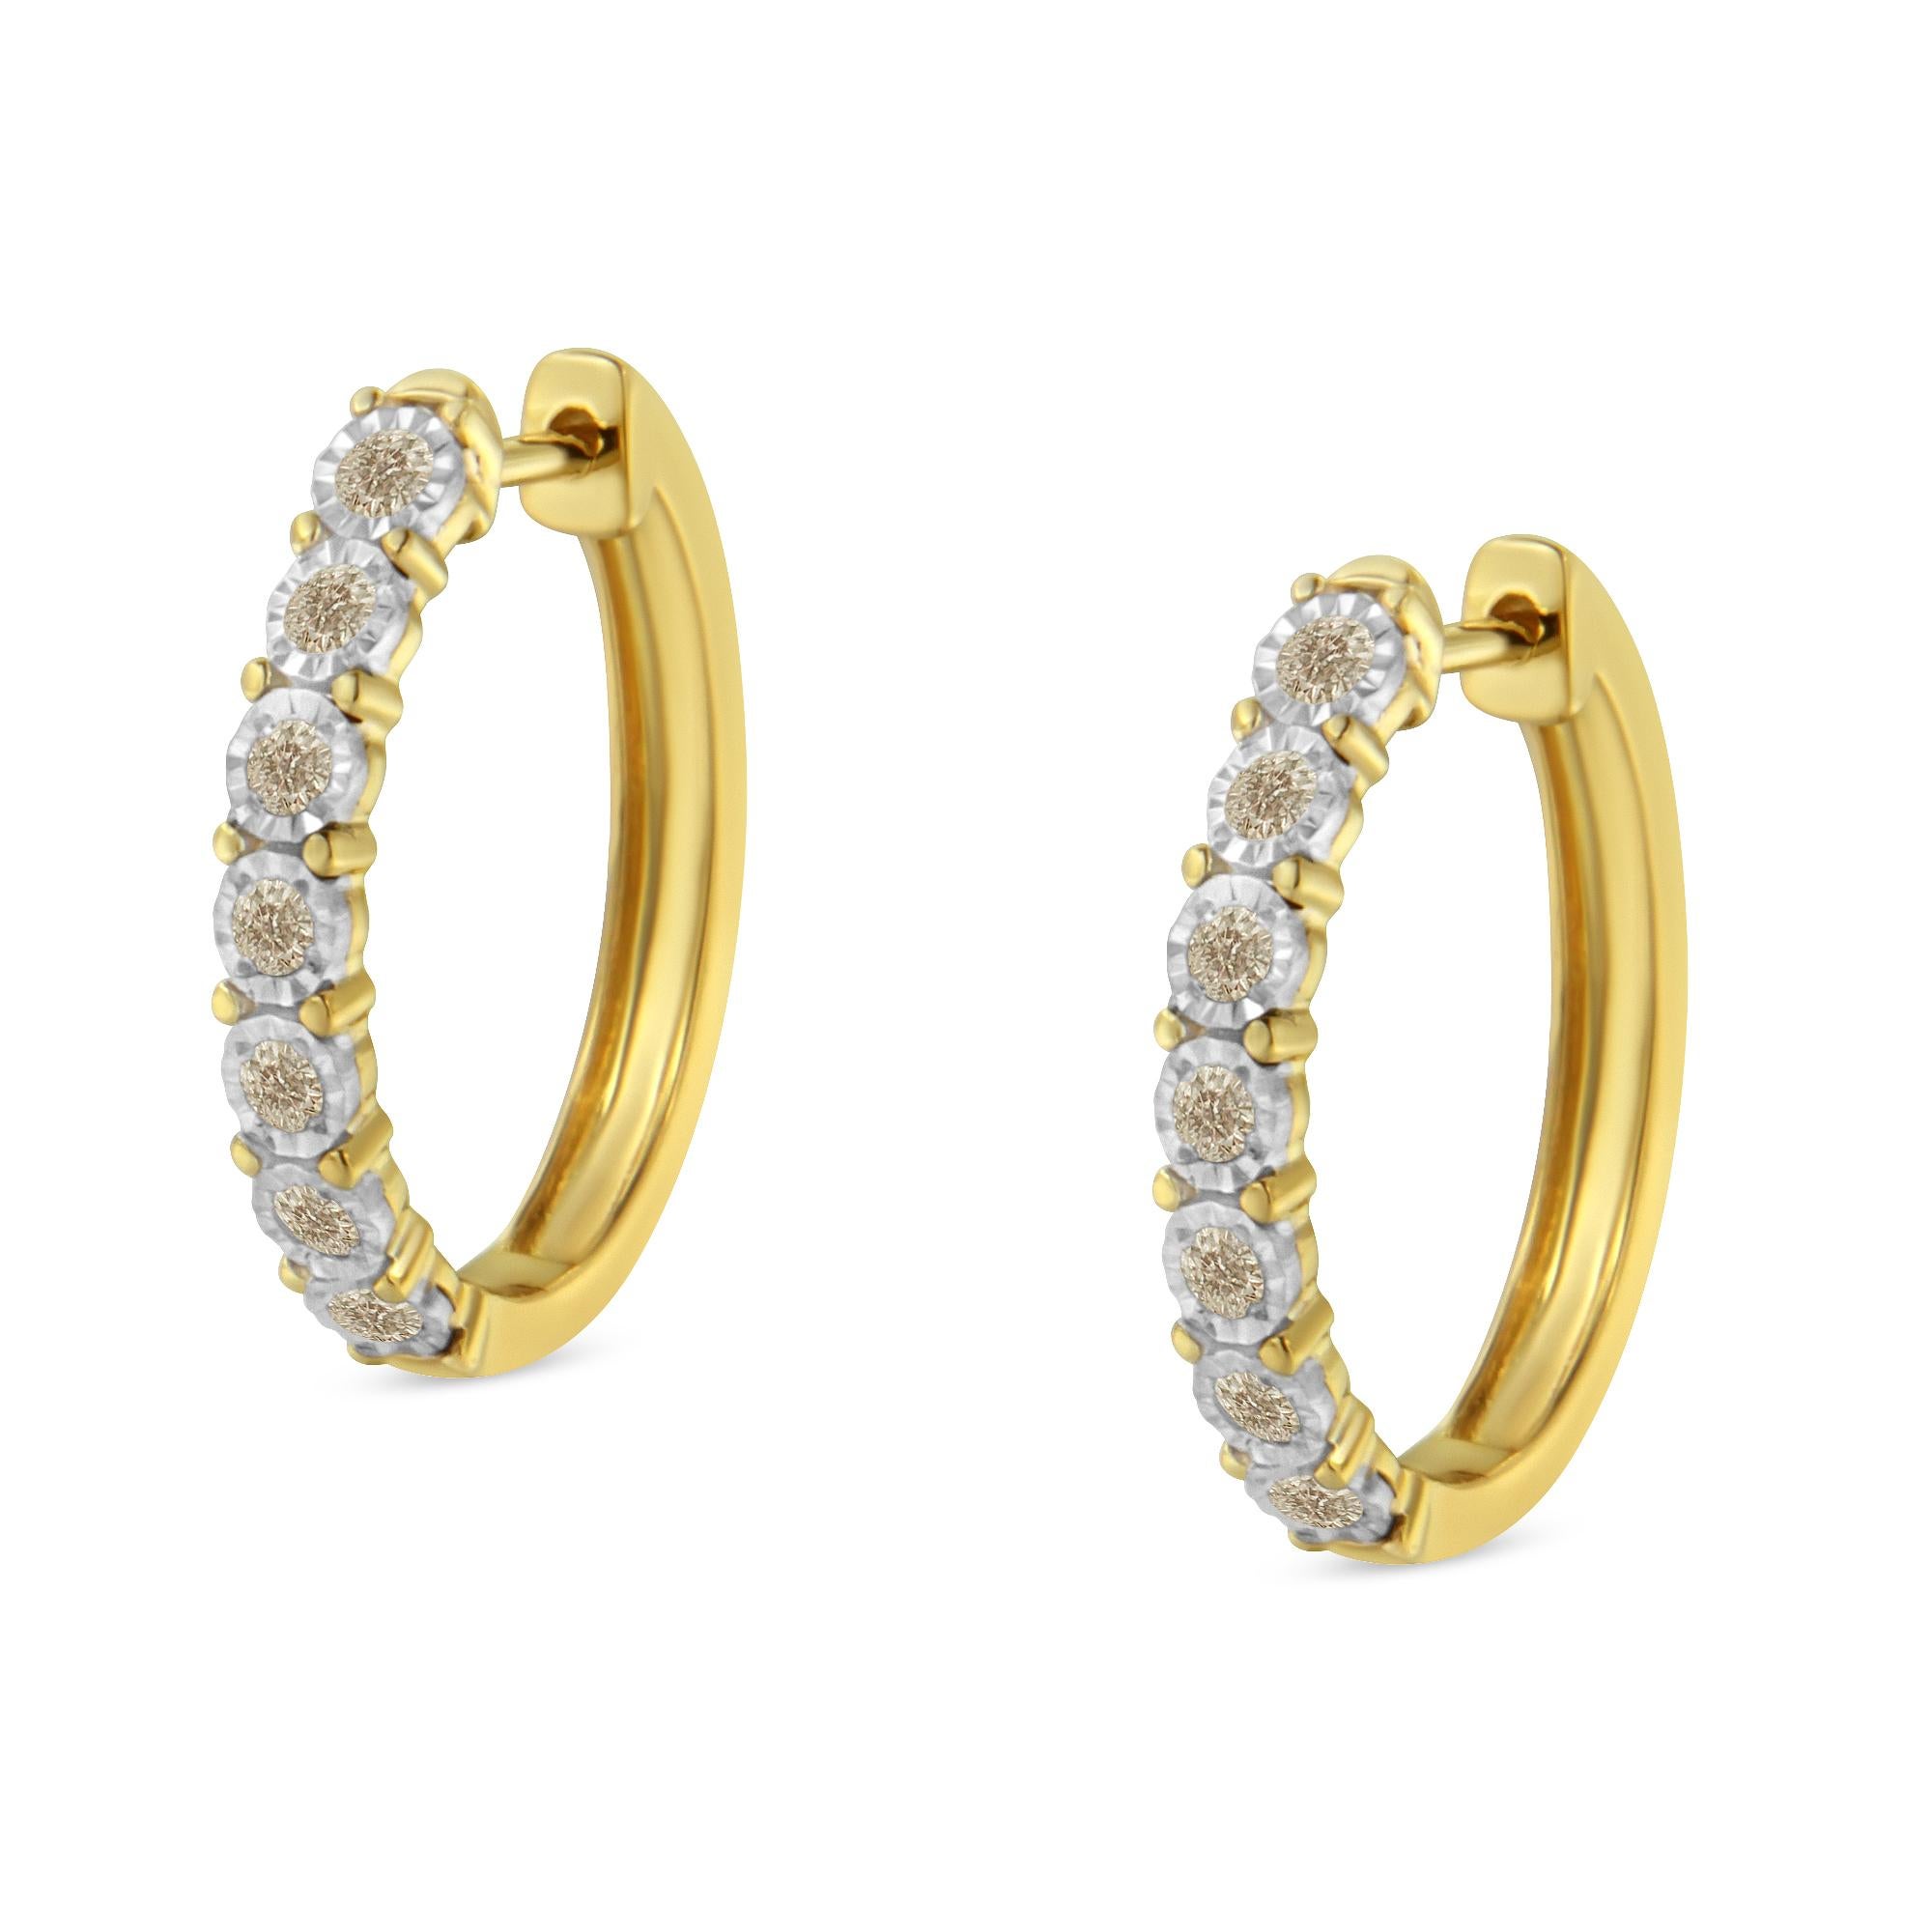 10K Two-Toned Gold 1/2 Carat Diamond Hoop Earrings In New Condition For Sale In New York, NY